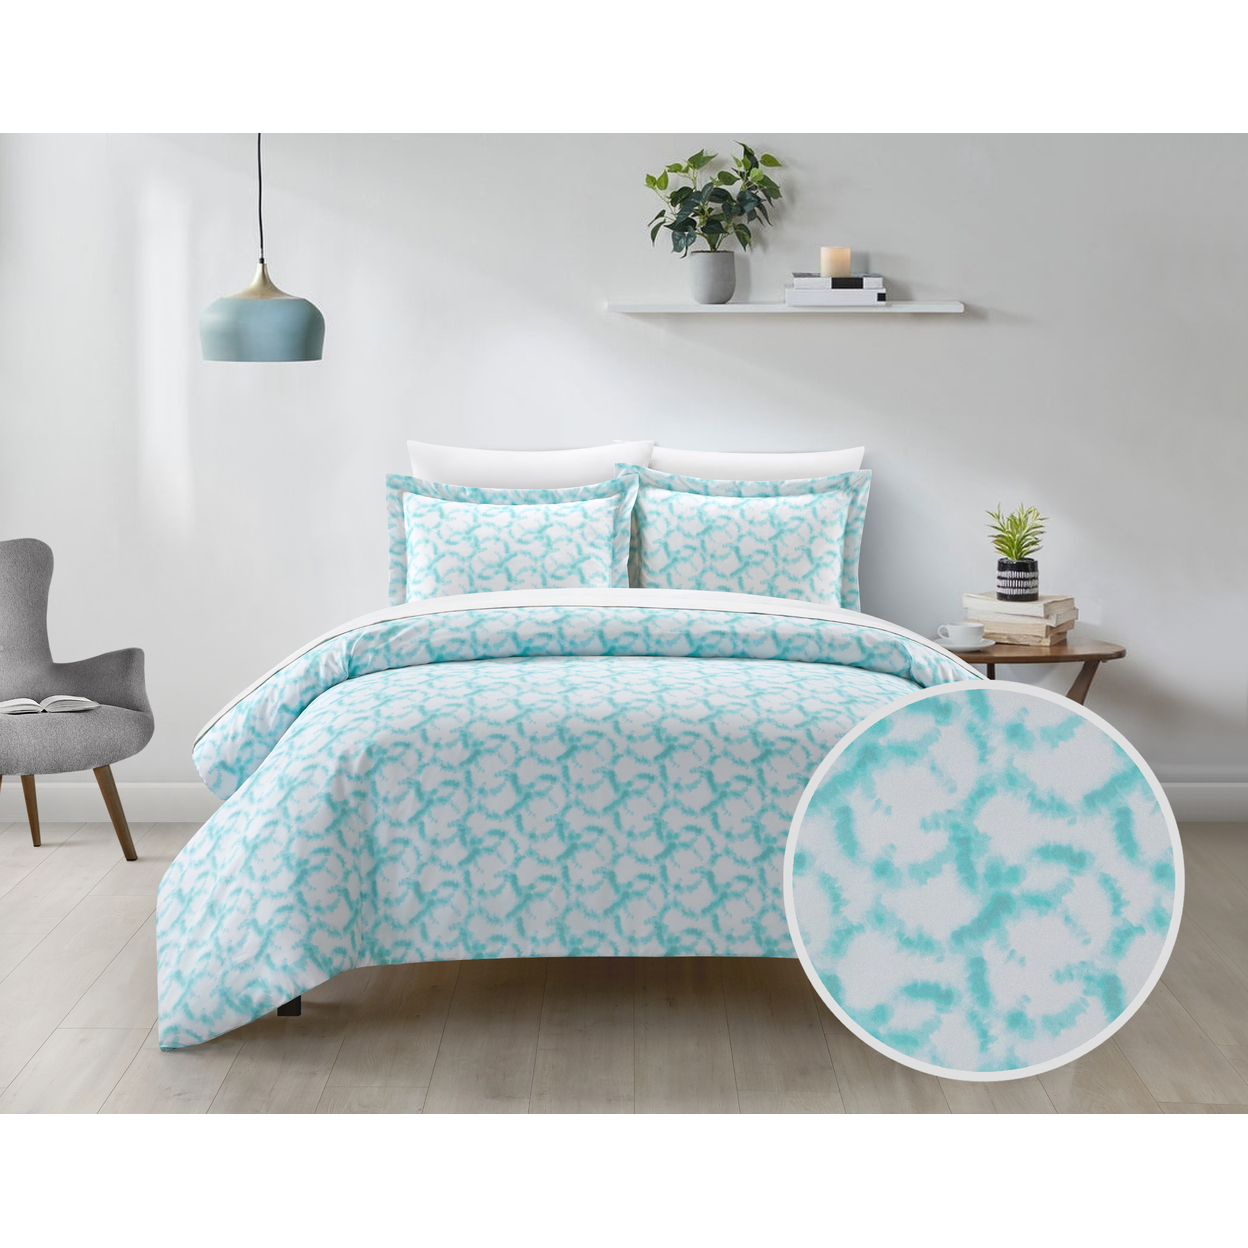 Khrissie 2 Or 3 Piece Duvet Cover Set Watercolor Overlapping Rings Pattern - Aqua, Twin